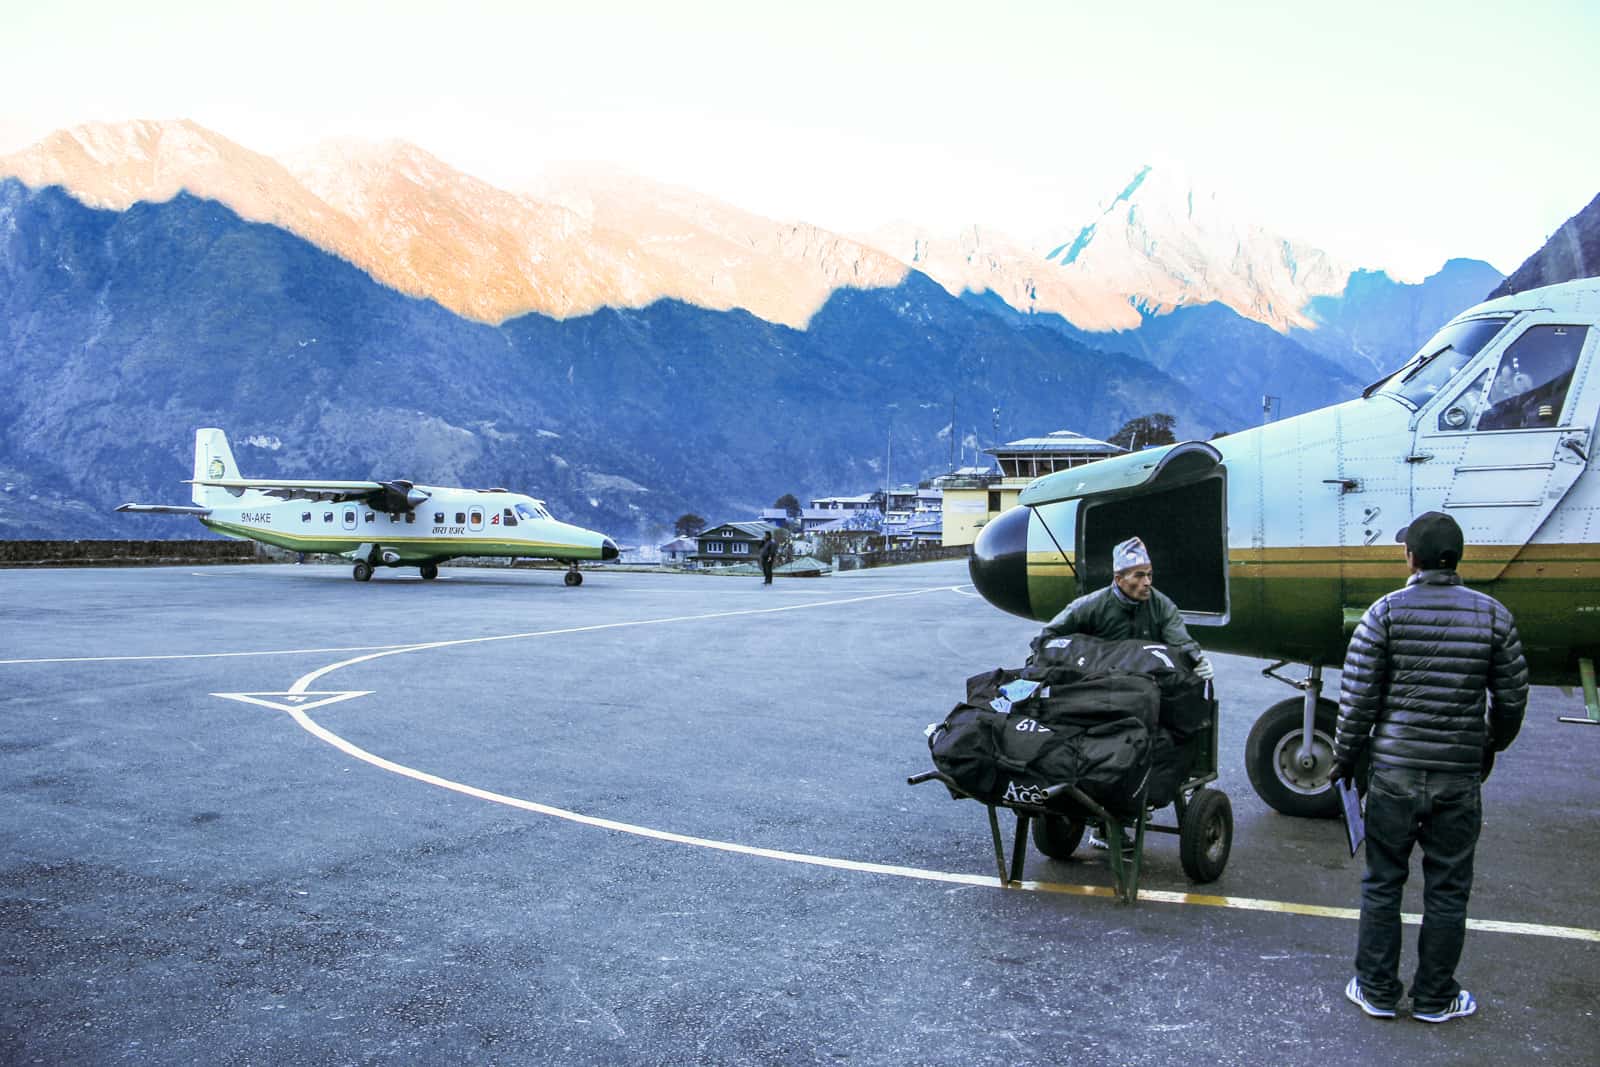 A man loads a small plane with trekking bags at the tiny, mountain backed Lukla airport Nepal - the start of the Everest Base Camp Trek